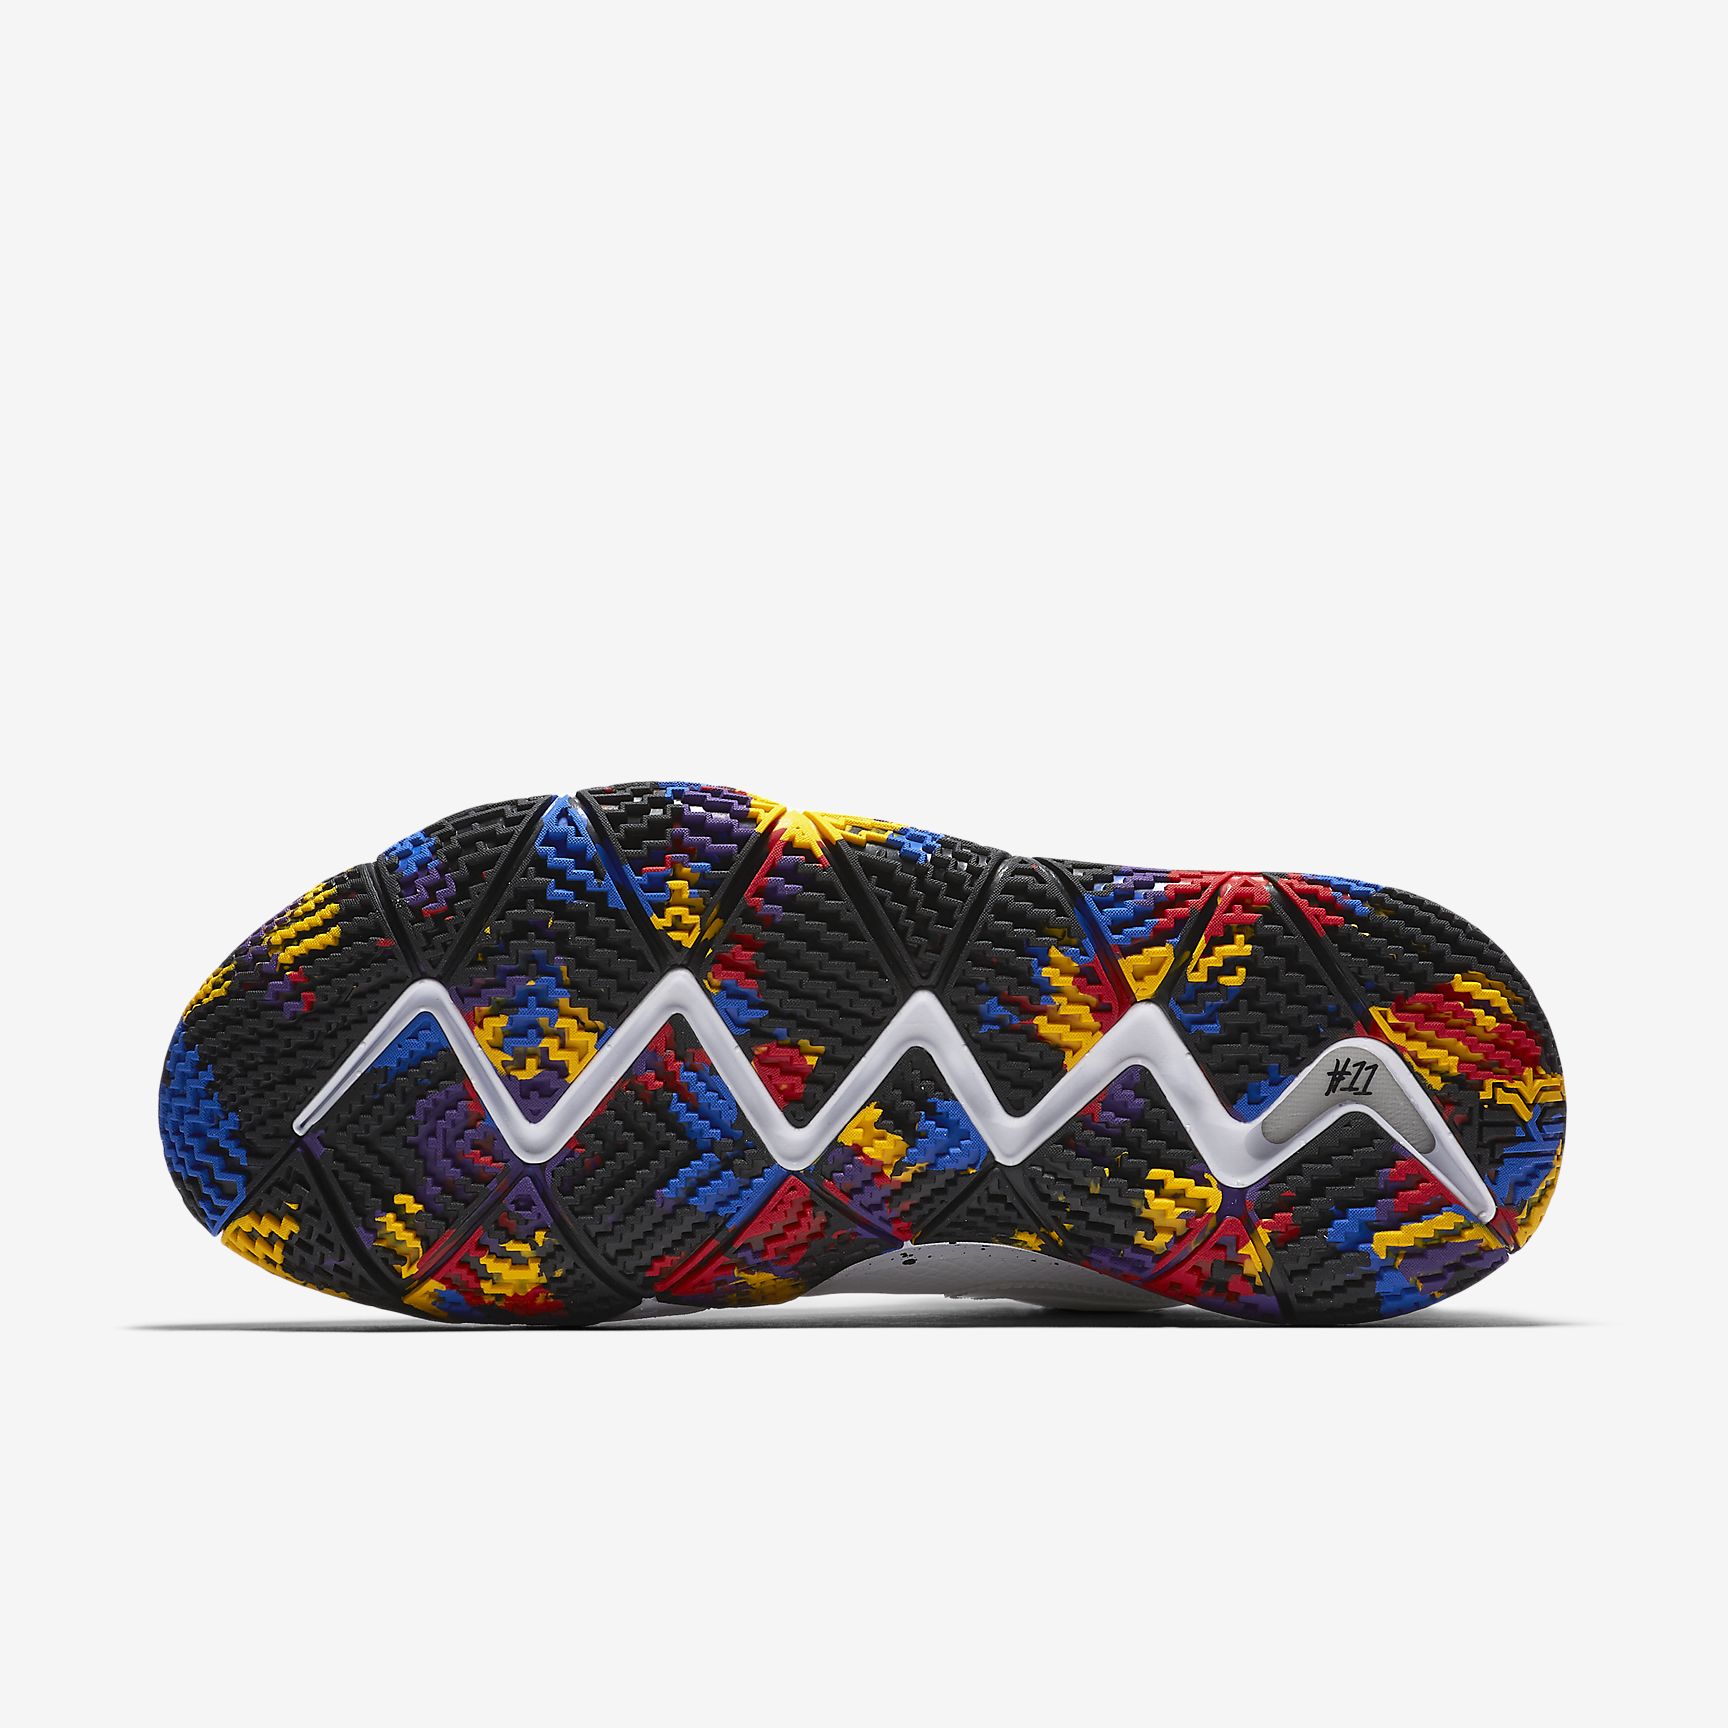 NIKE KYRIE 4 EP NCAA MARCH MADNESS